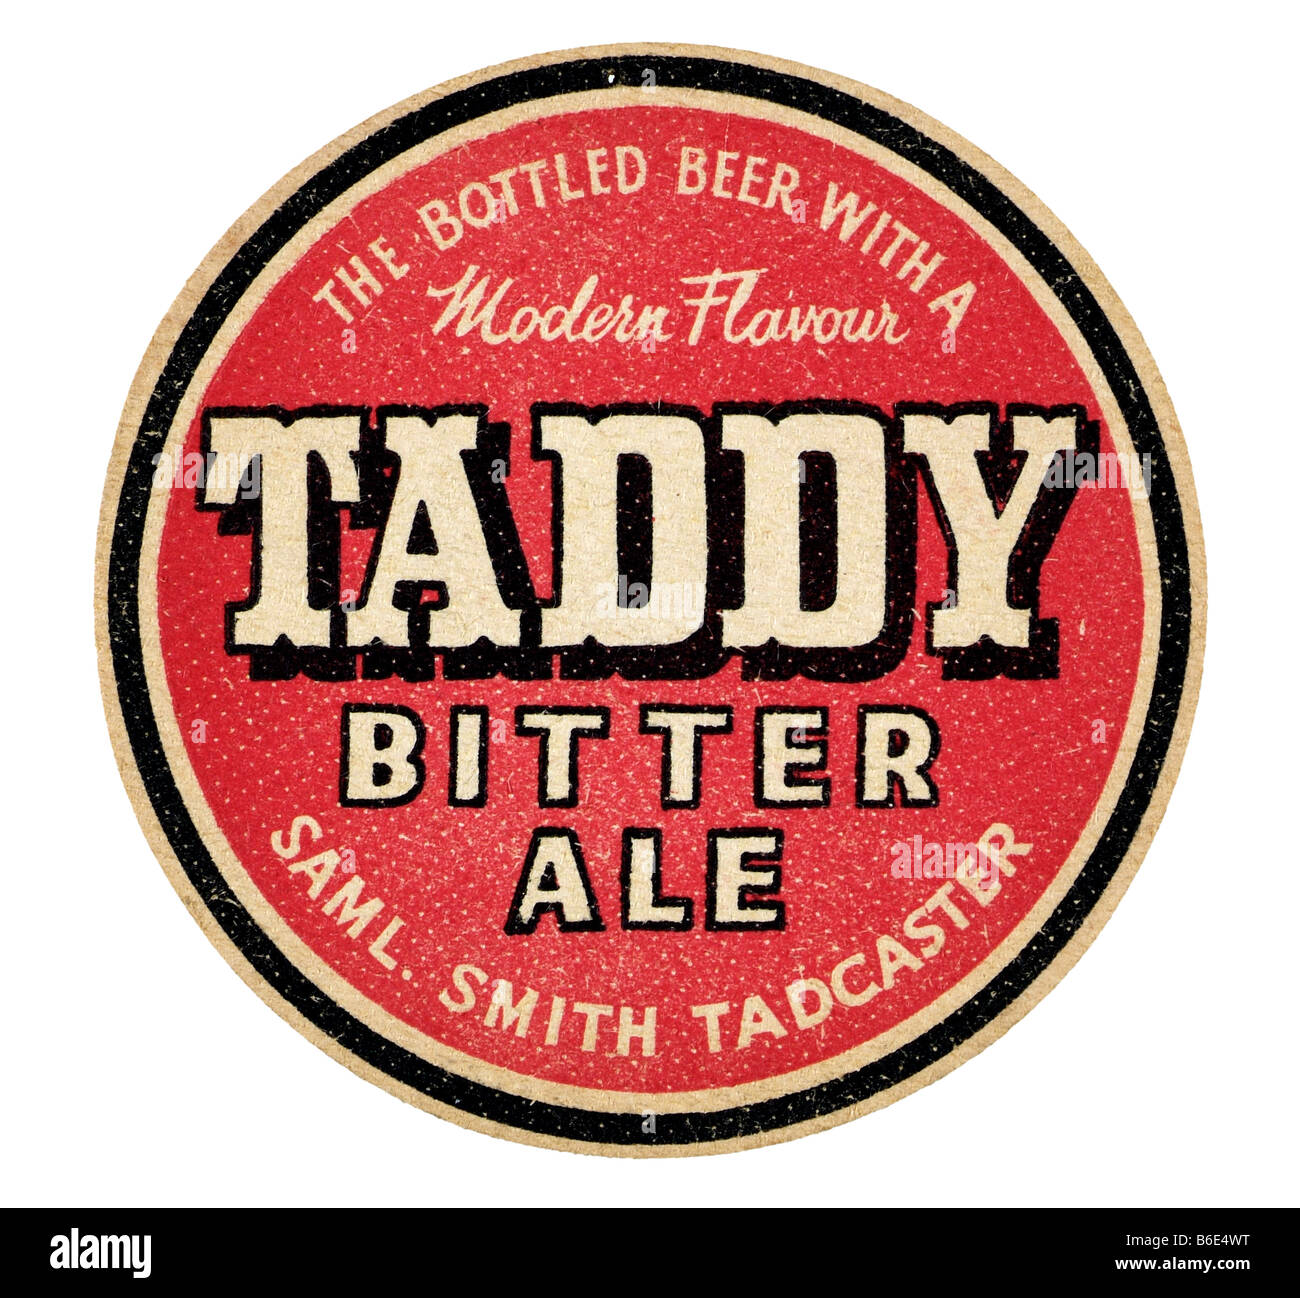 taddy bottled beer with a modern flavour bitter ale saml smith tadcaster Stock Photo